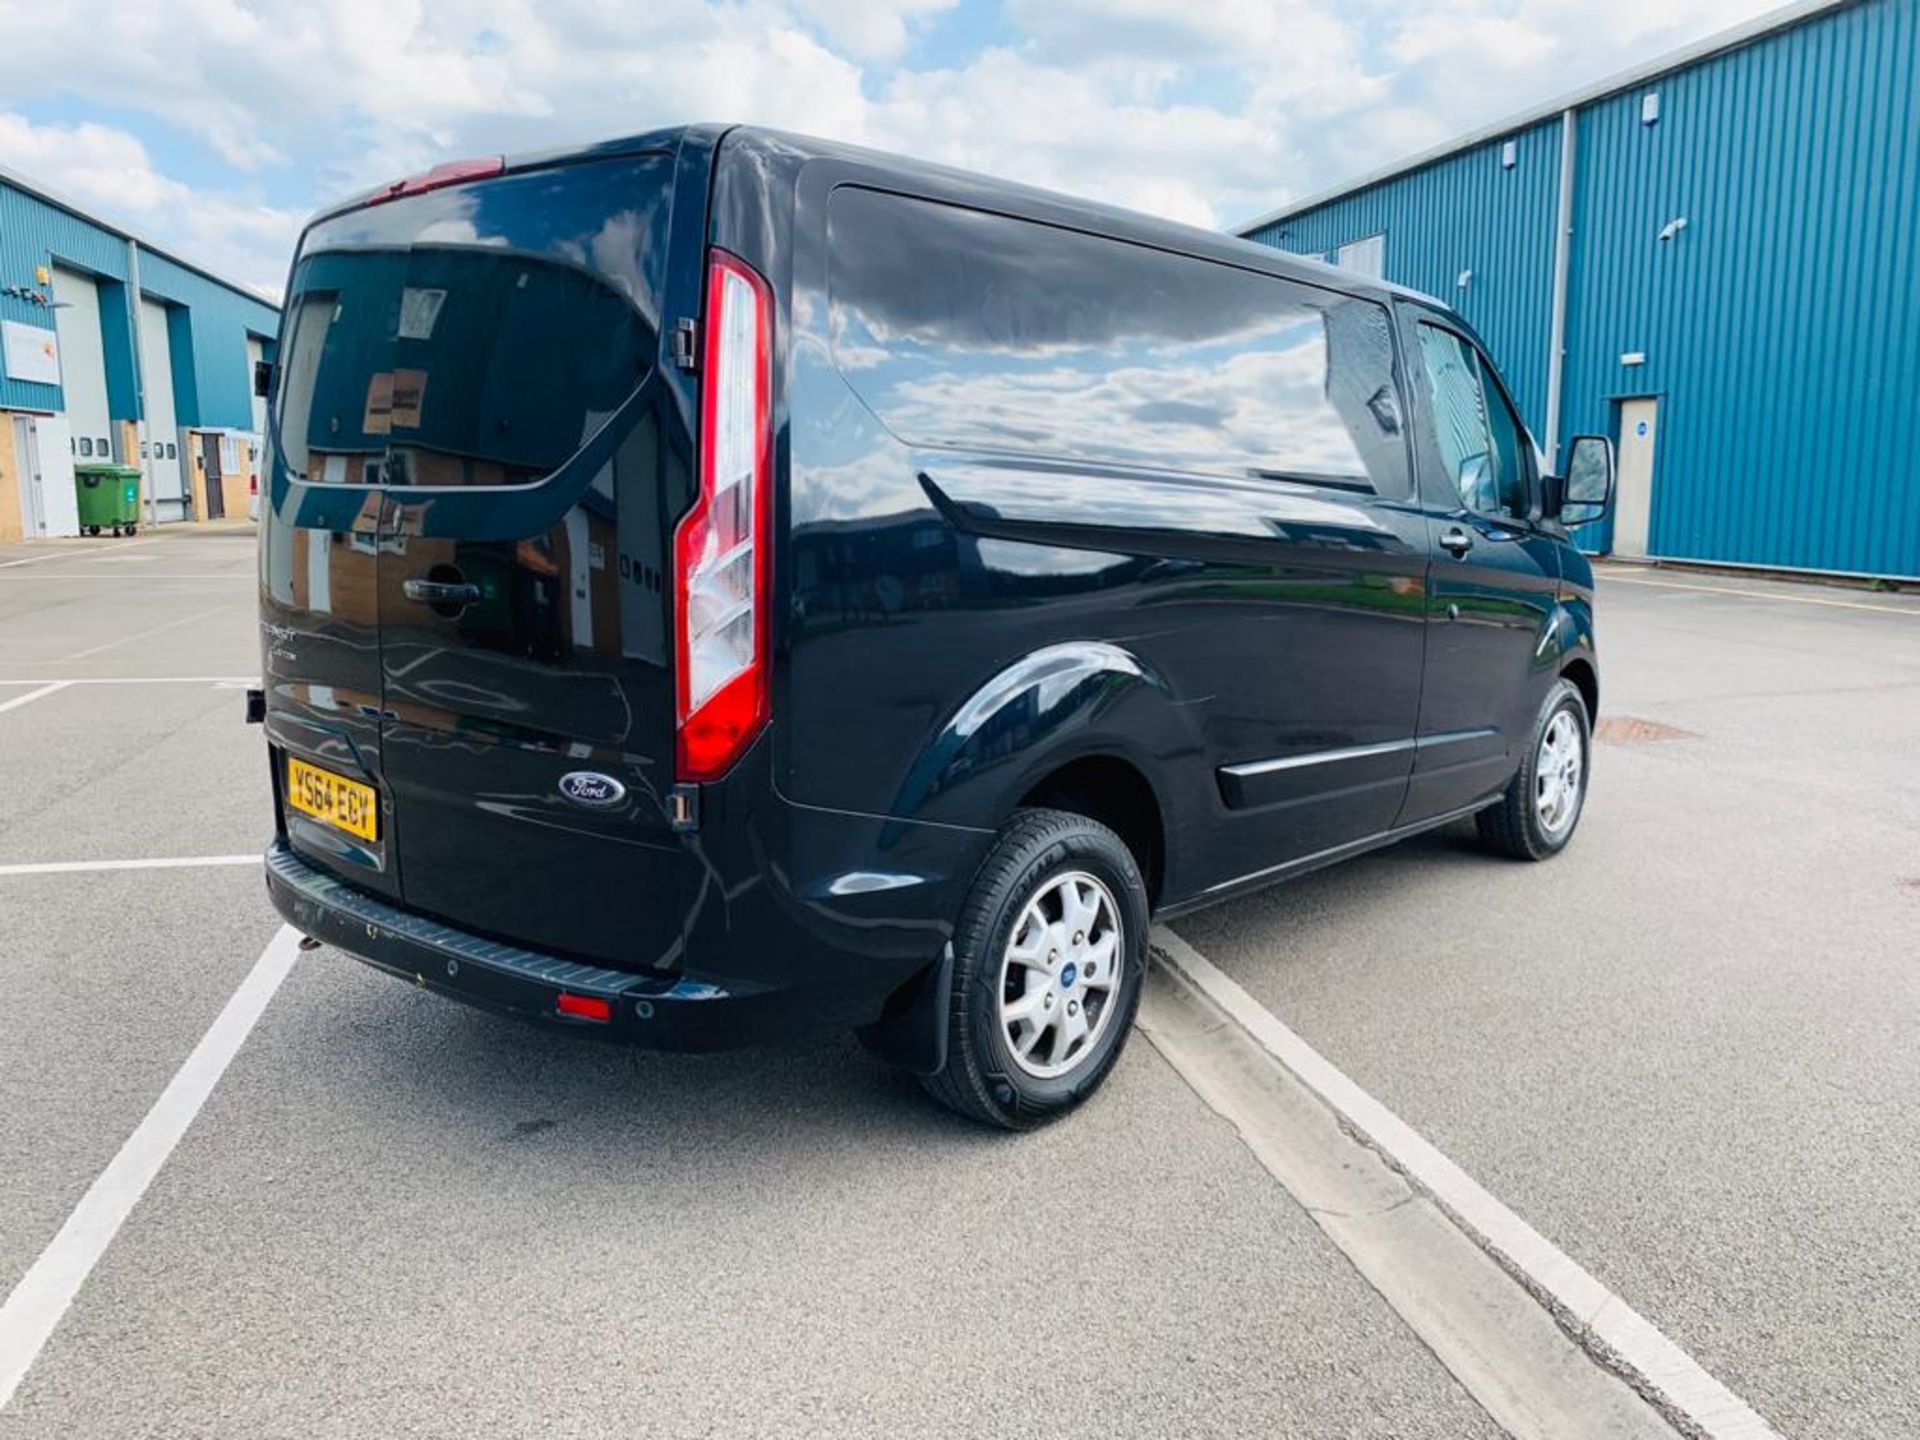 Ford Transit 2.2 TDCI Custom 270 Limited 2015 Model 6 Speed - Air Con - Park Assist - Image 7 of 26